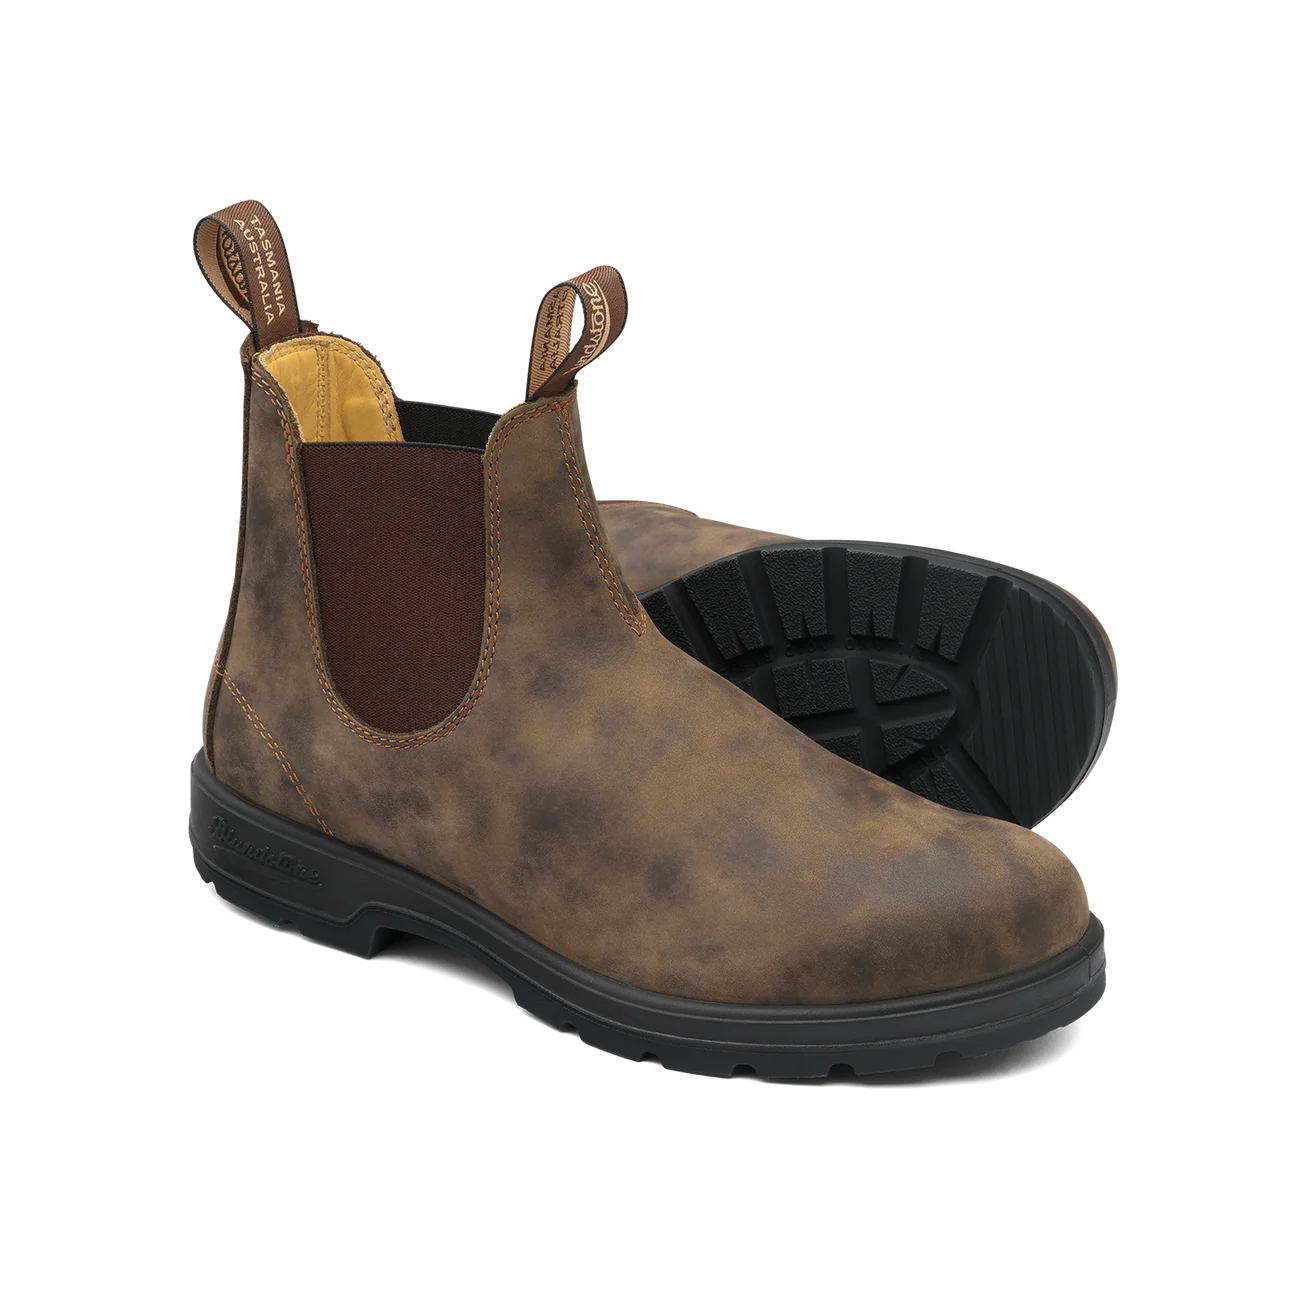 Blundstone 585 Classic Boots